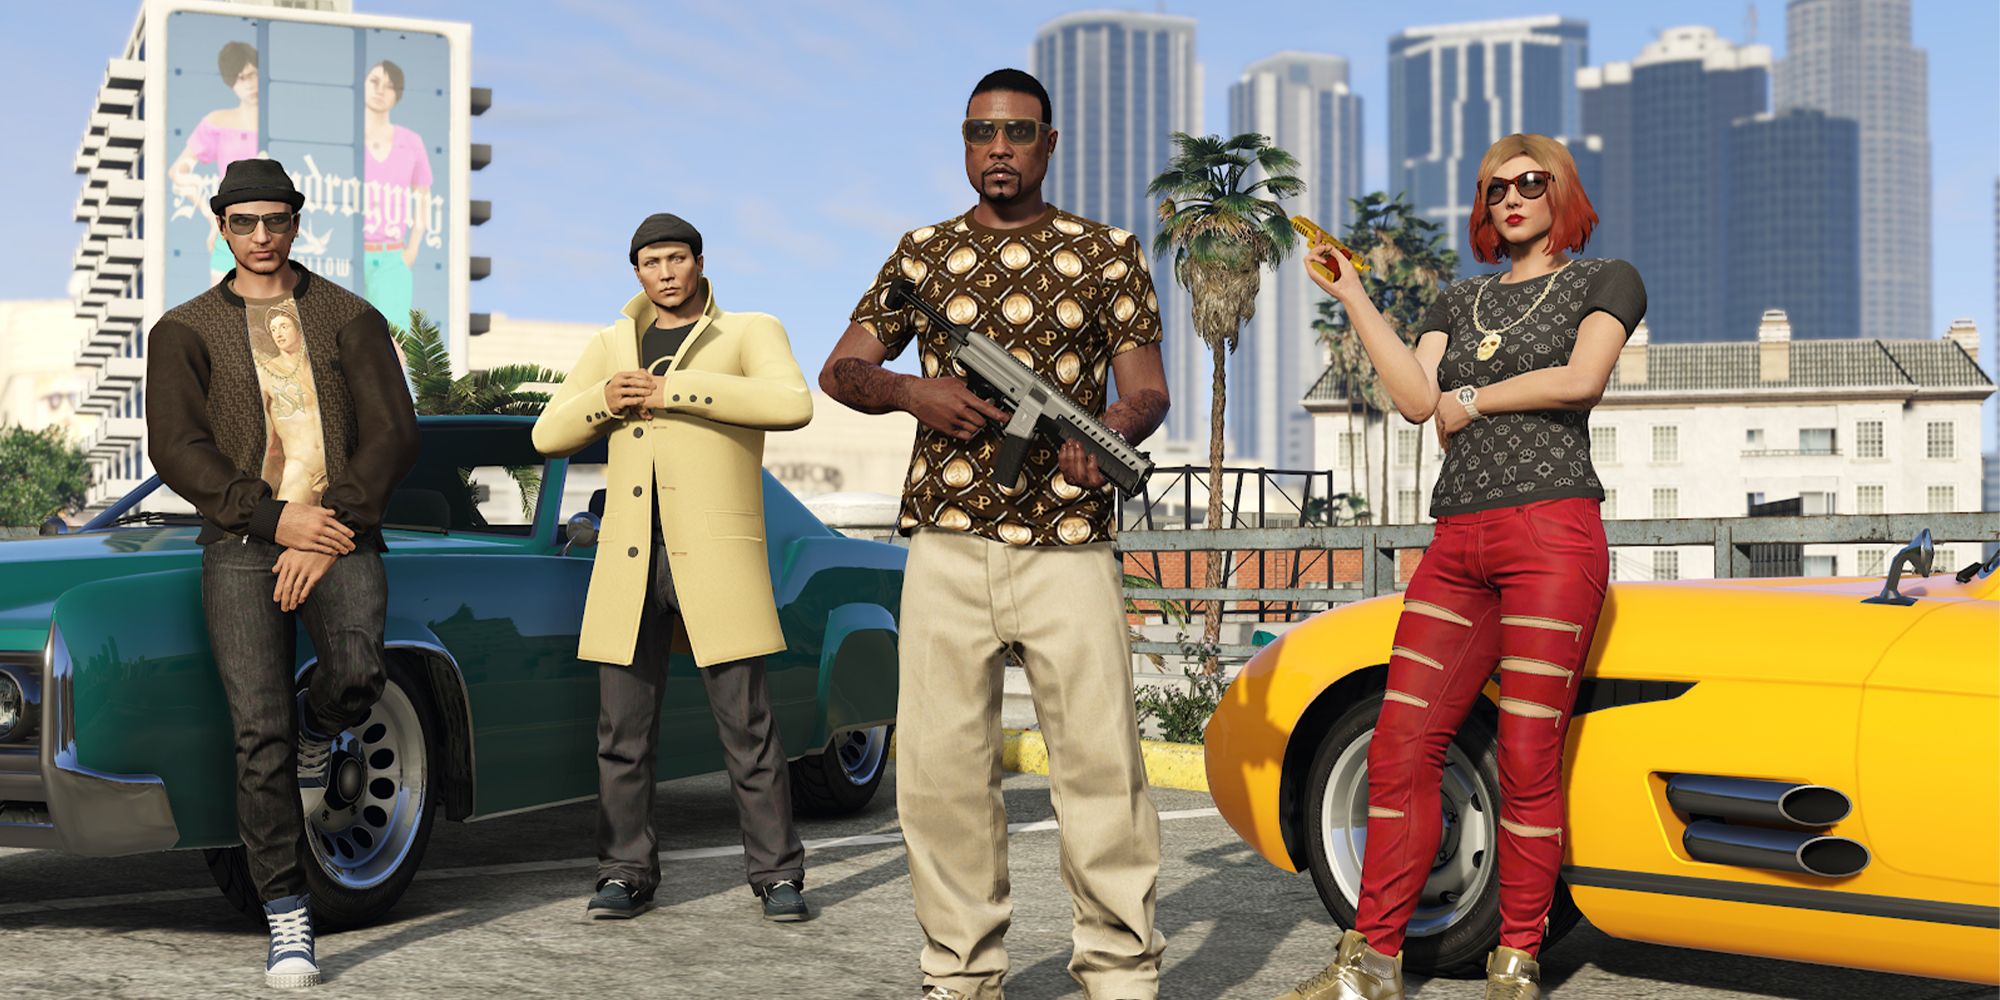 The Best Activities To Do With Friends in GTA Online